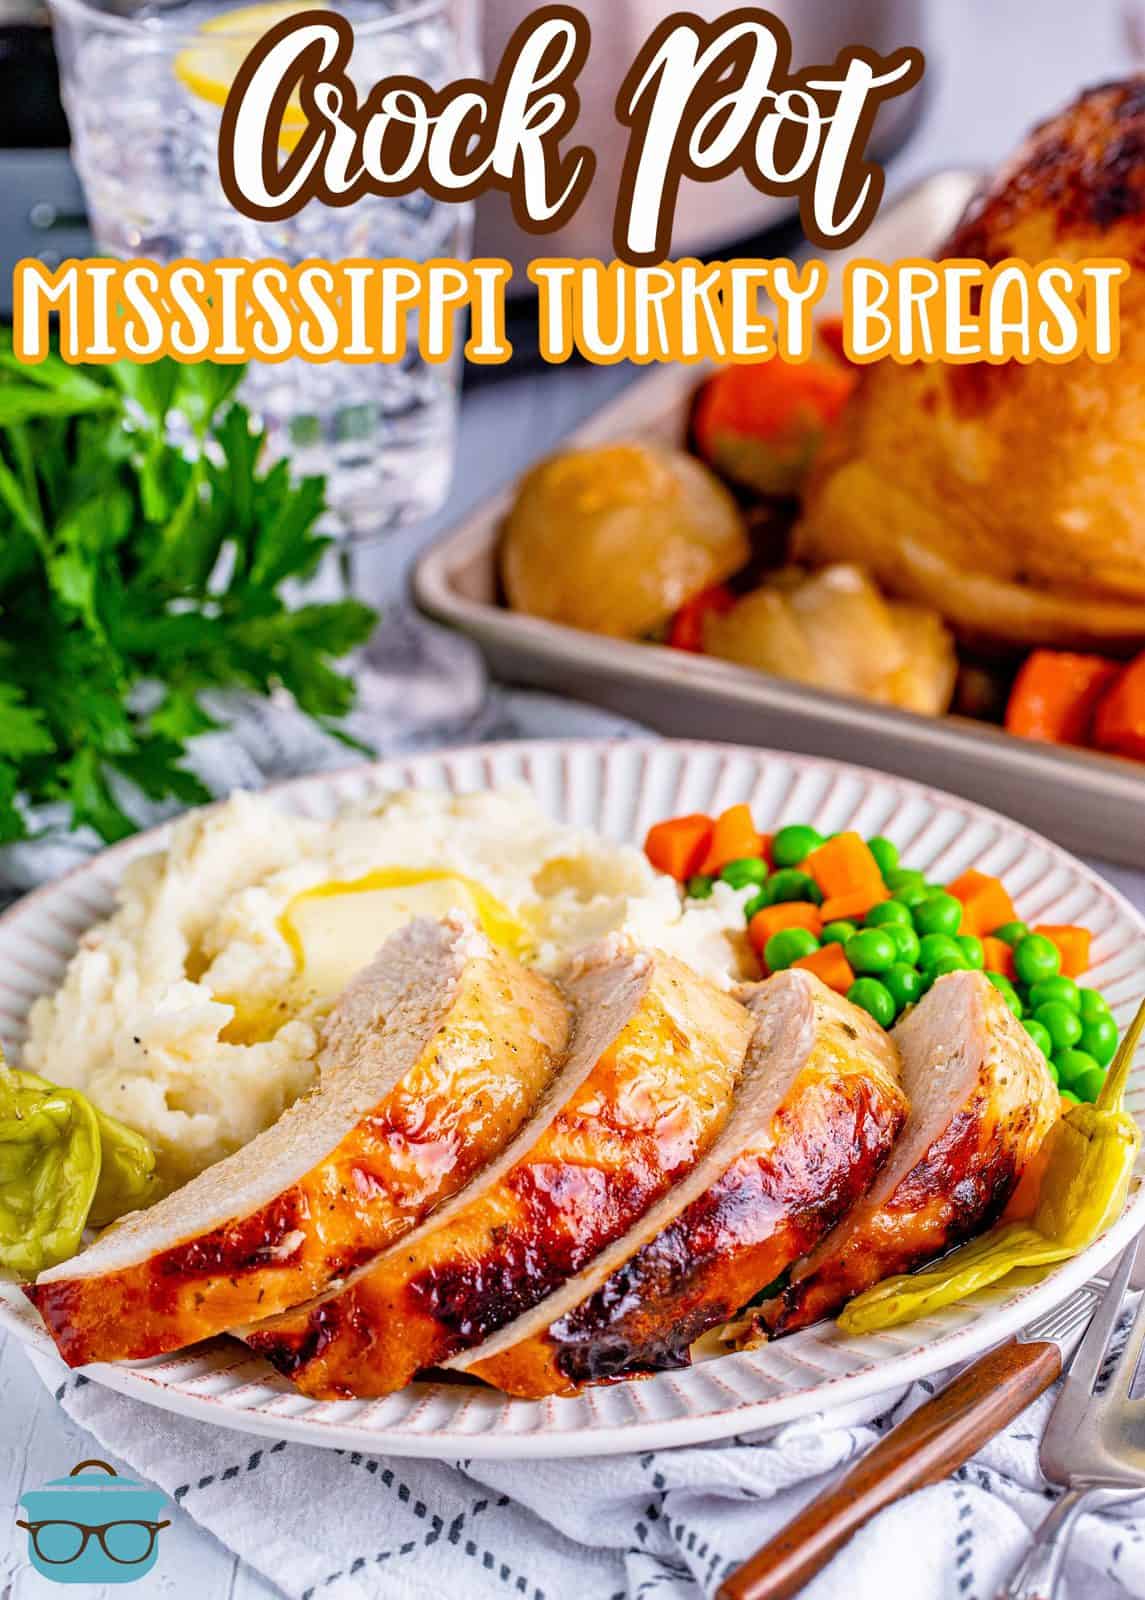 Pinterest image of Crock Pot Mississippi Turkey Breast plated with sides.